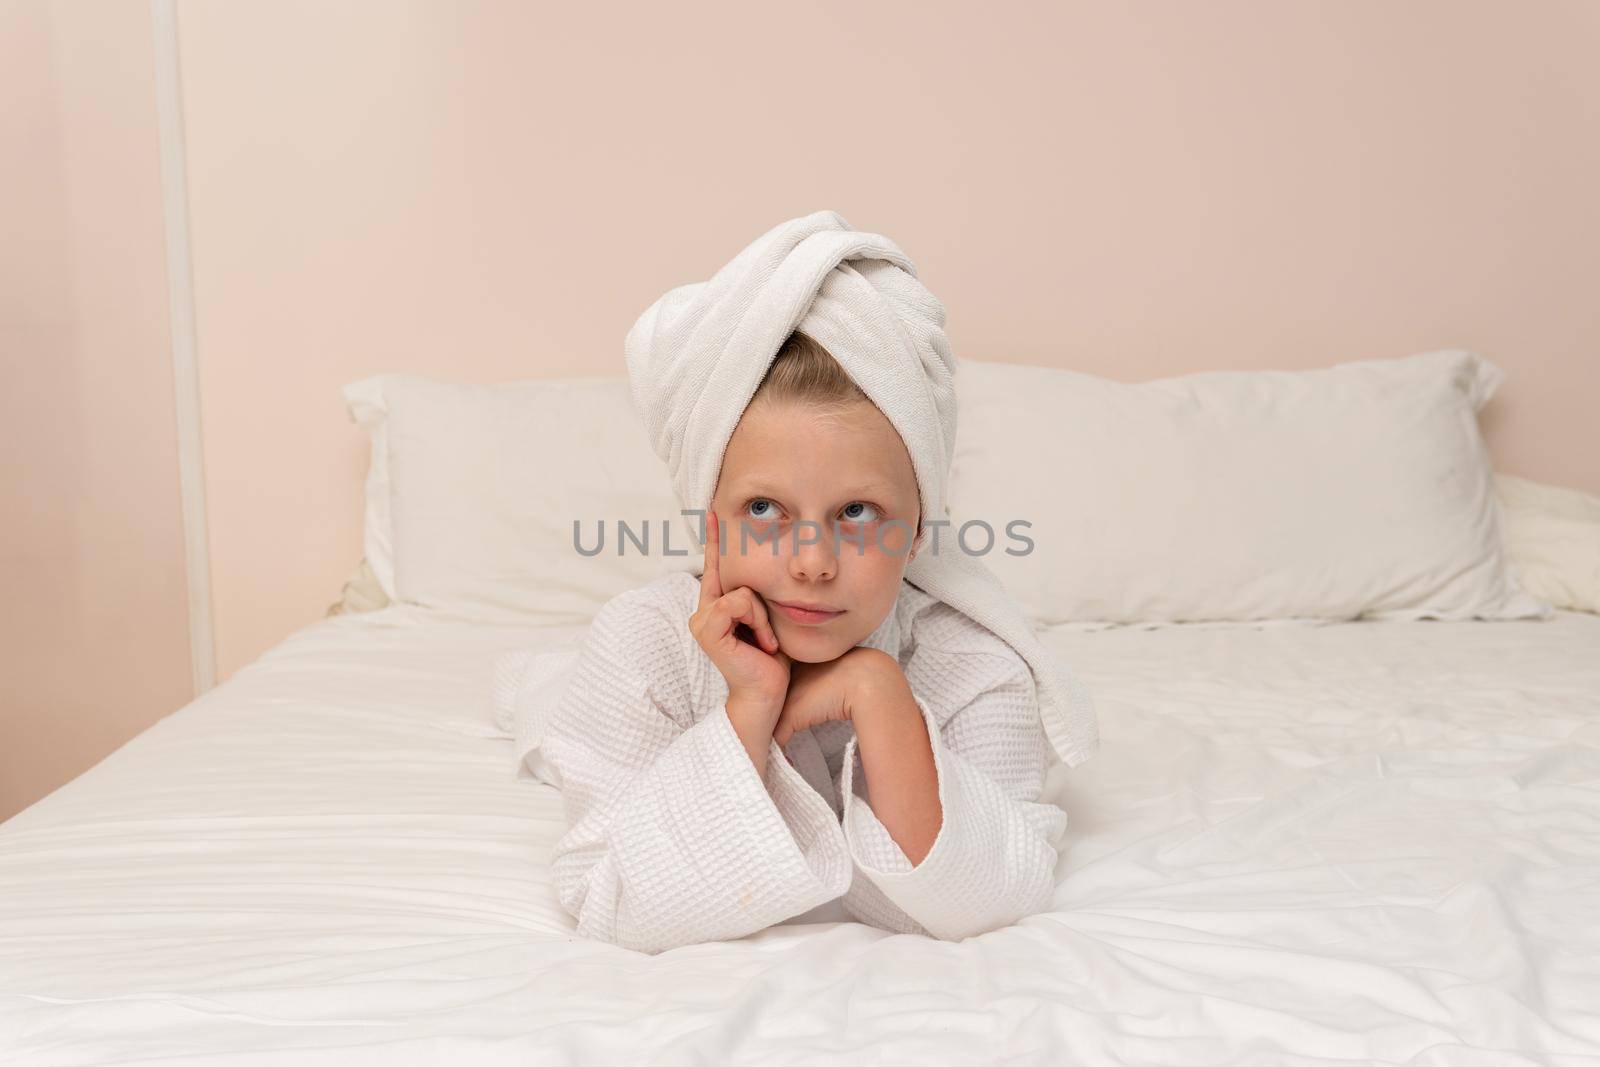 Elbows bathrobe Creek copyspace smile coffee bed girl white bathroom, from people dressing for happy from caucasian gown, pirate background. Care funny wellness, comfort